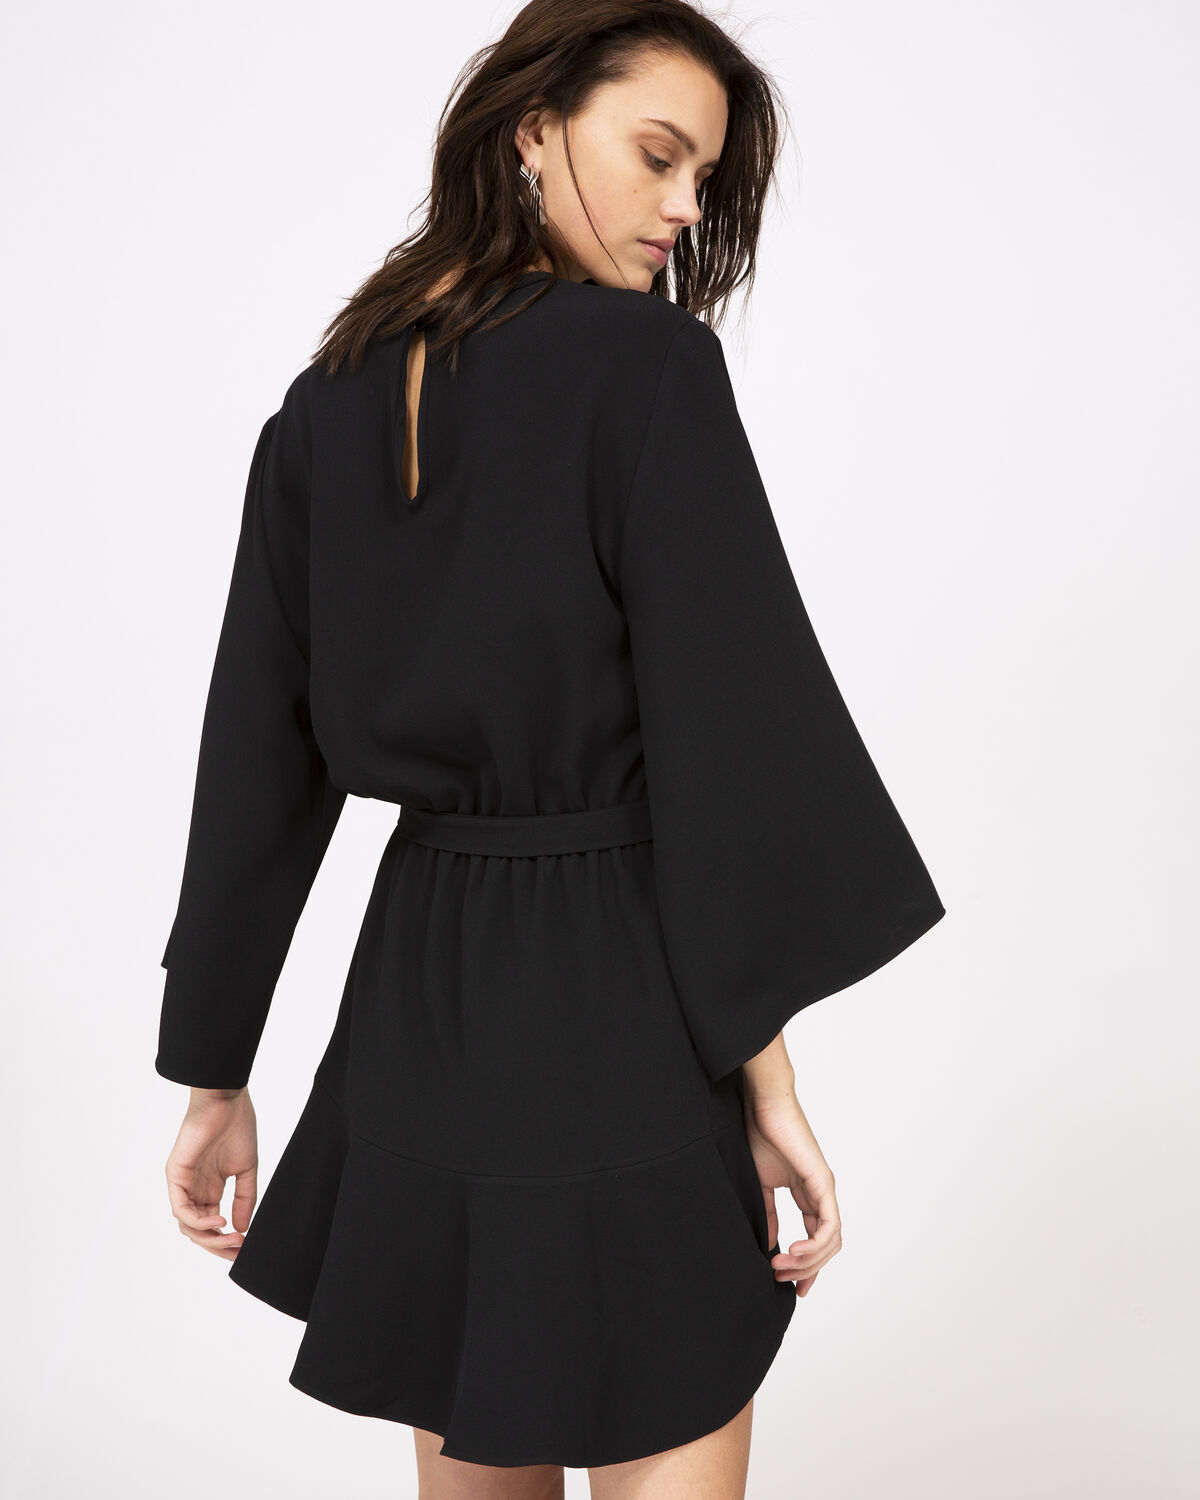 Photo of IRO Paris Layer Dress Black - This Flared Dress Is Characterized By Its Large Kimono Inspired Sleeves And Its Belt To Tie. Combine It With A Pair Of Boots For A Resolutely Rock Look. Dresses